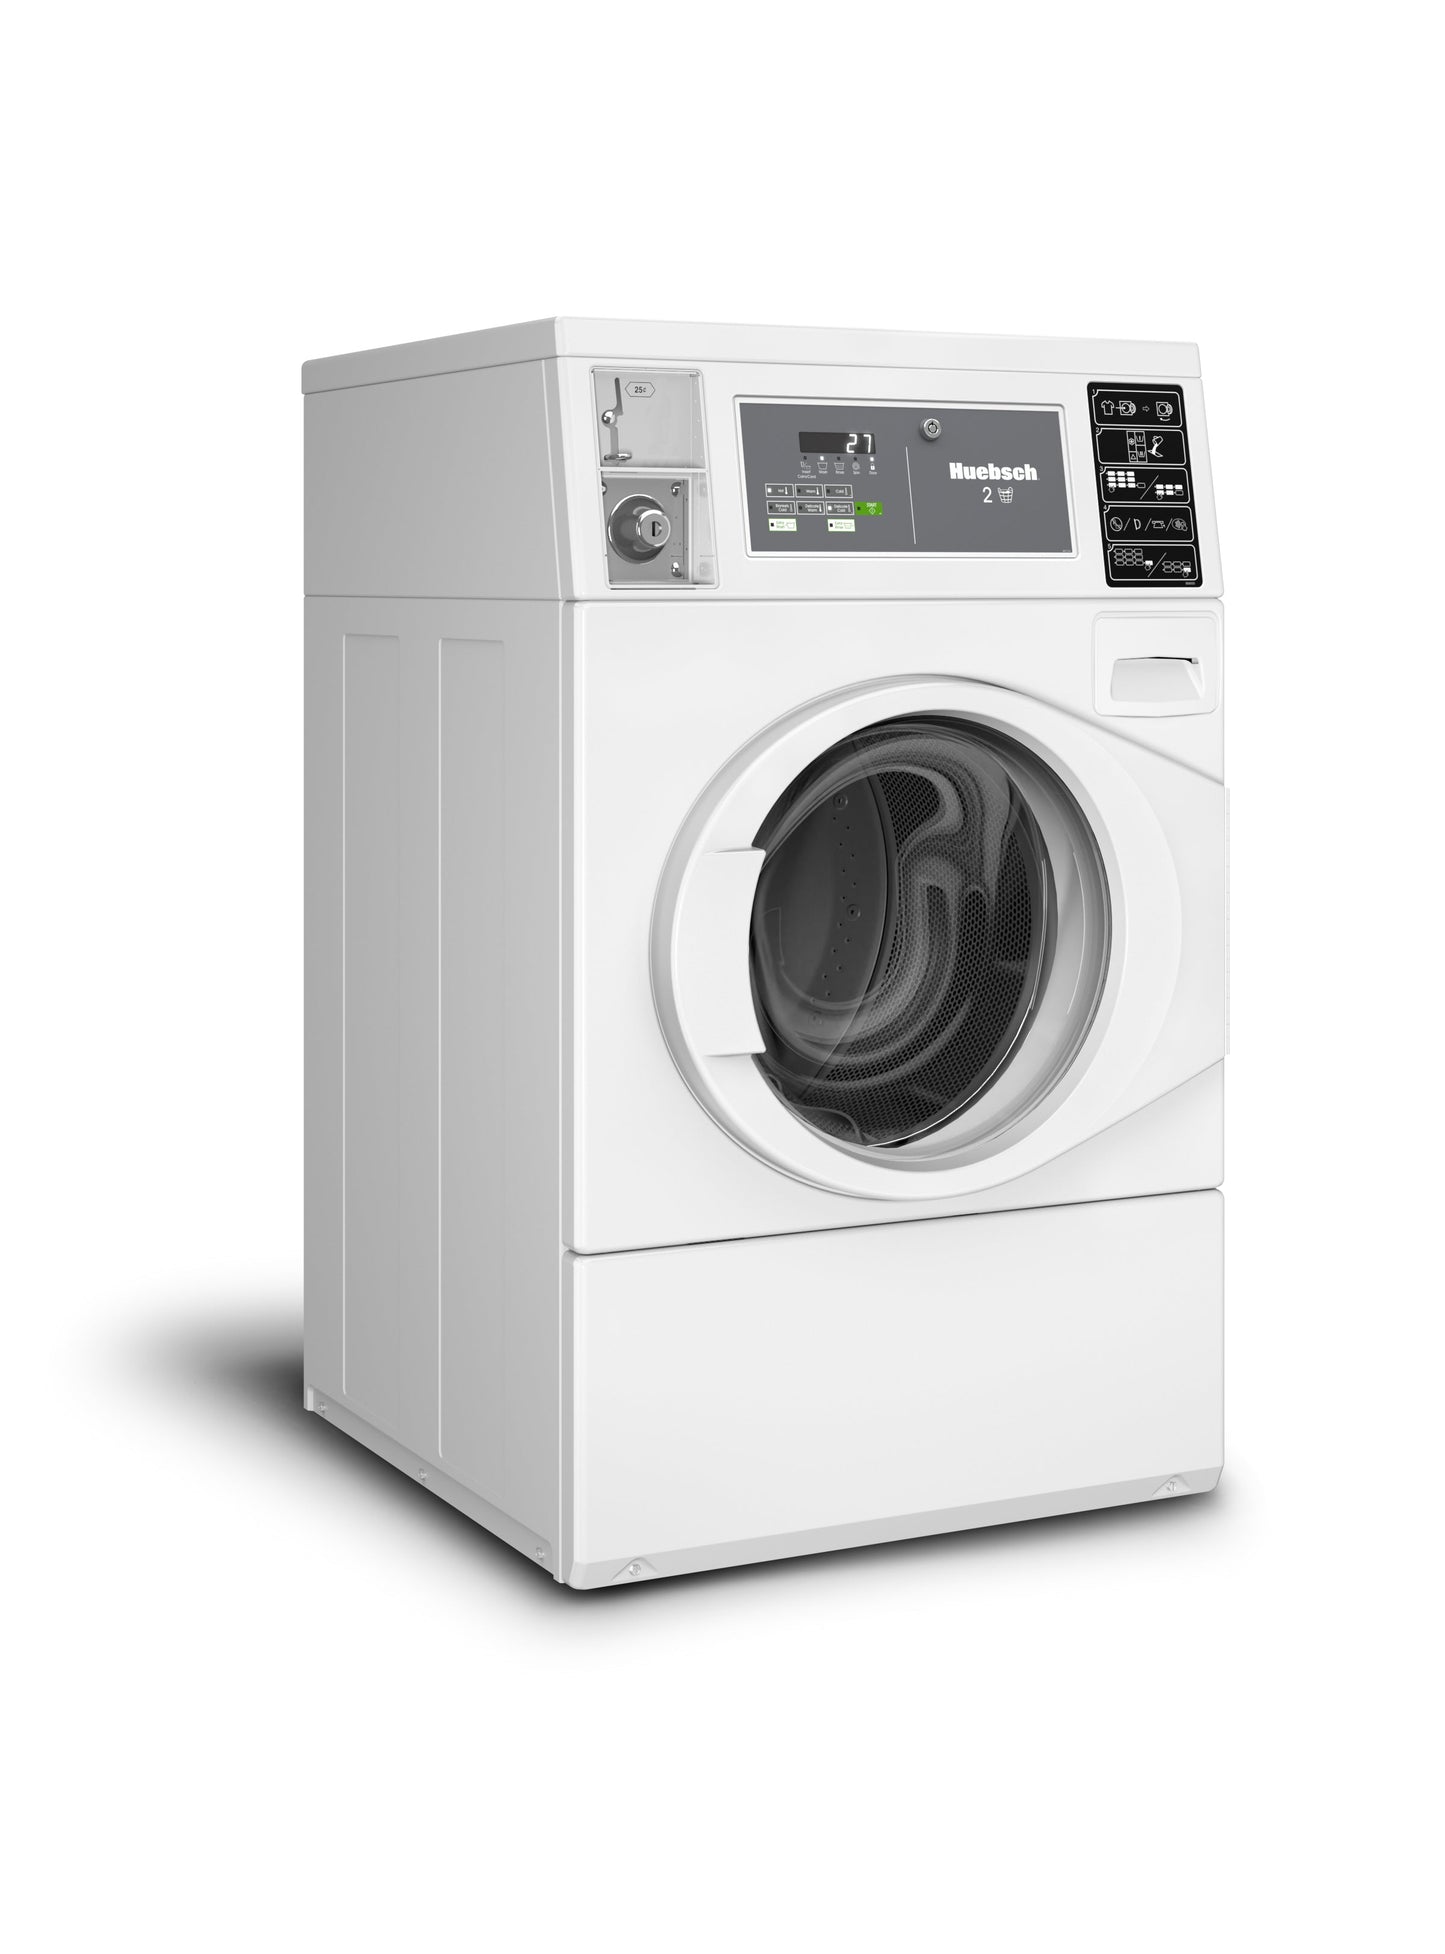 COMMERCIAL FRONT LOAD WASHER S&D